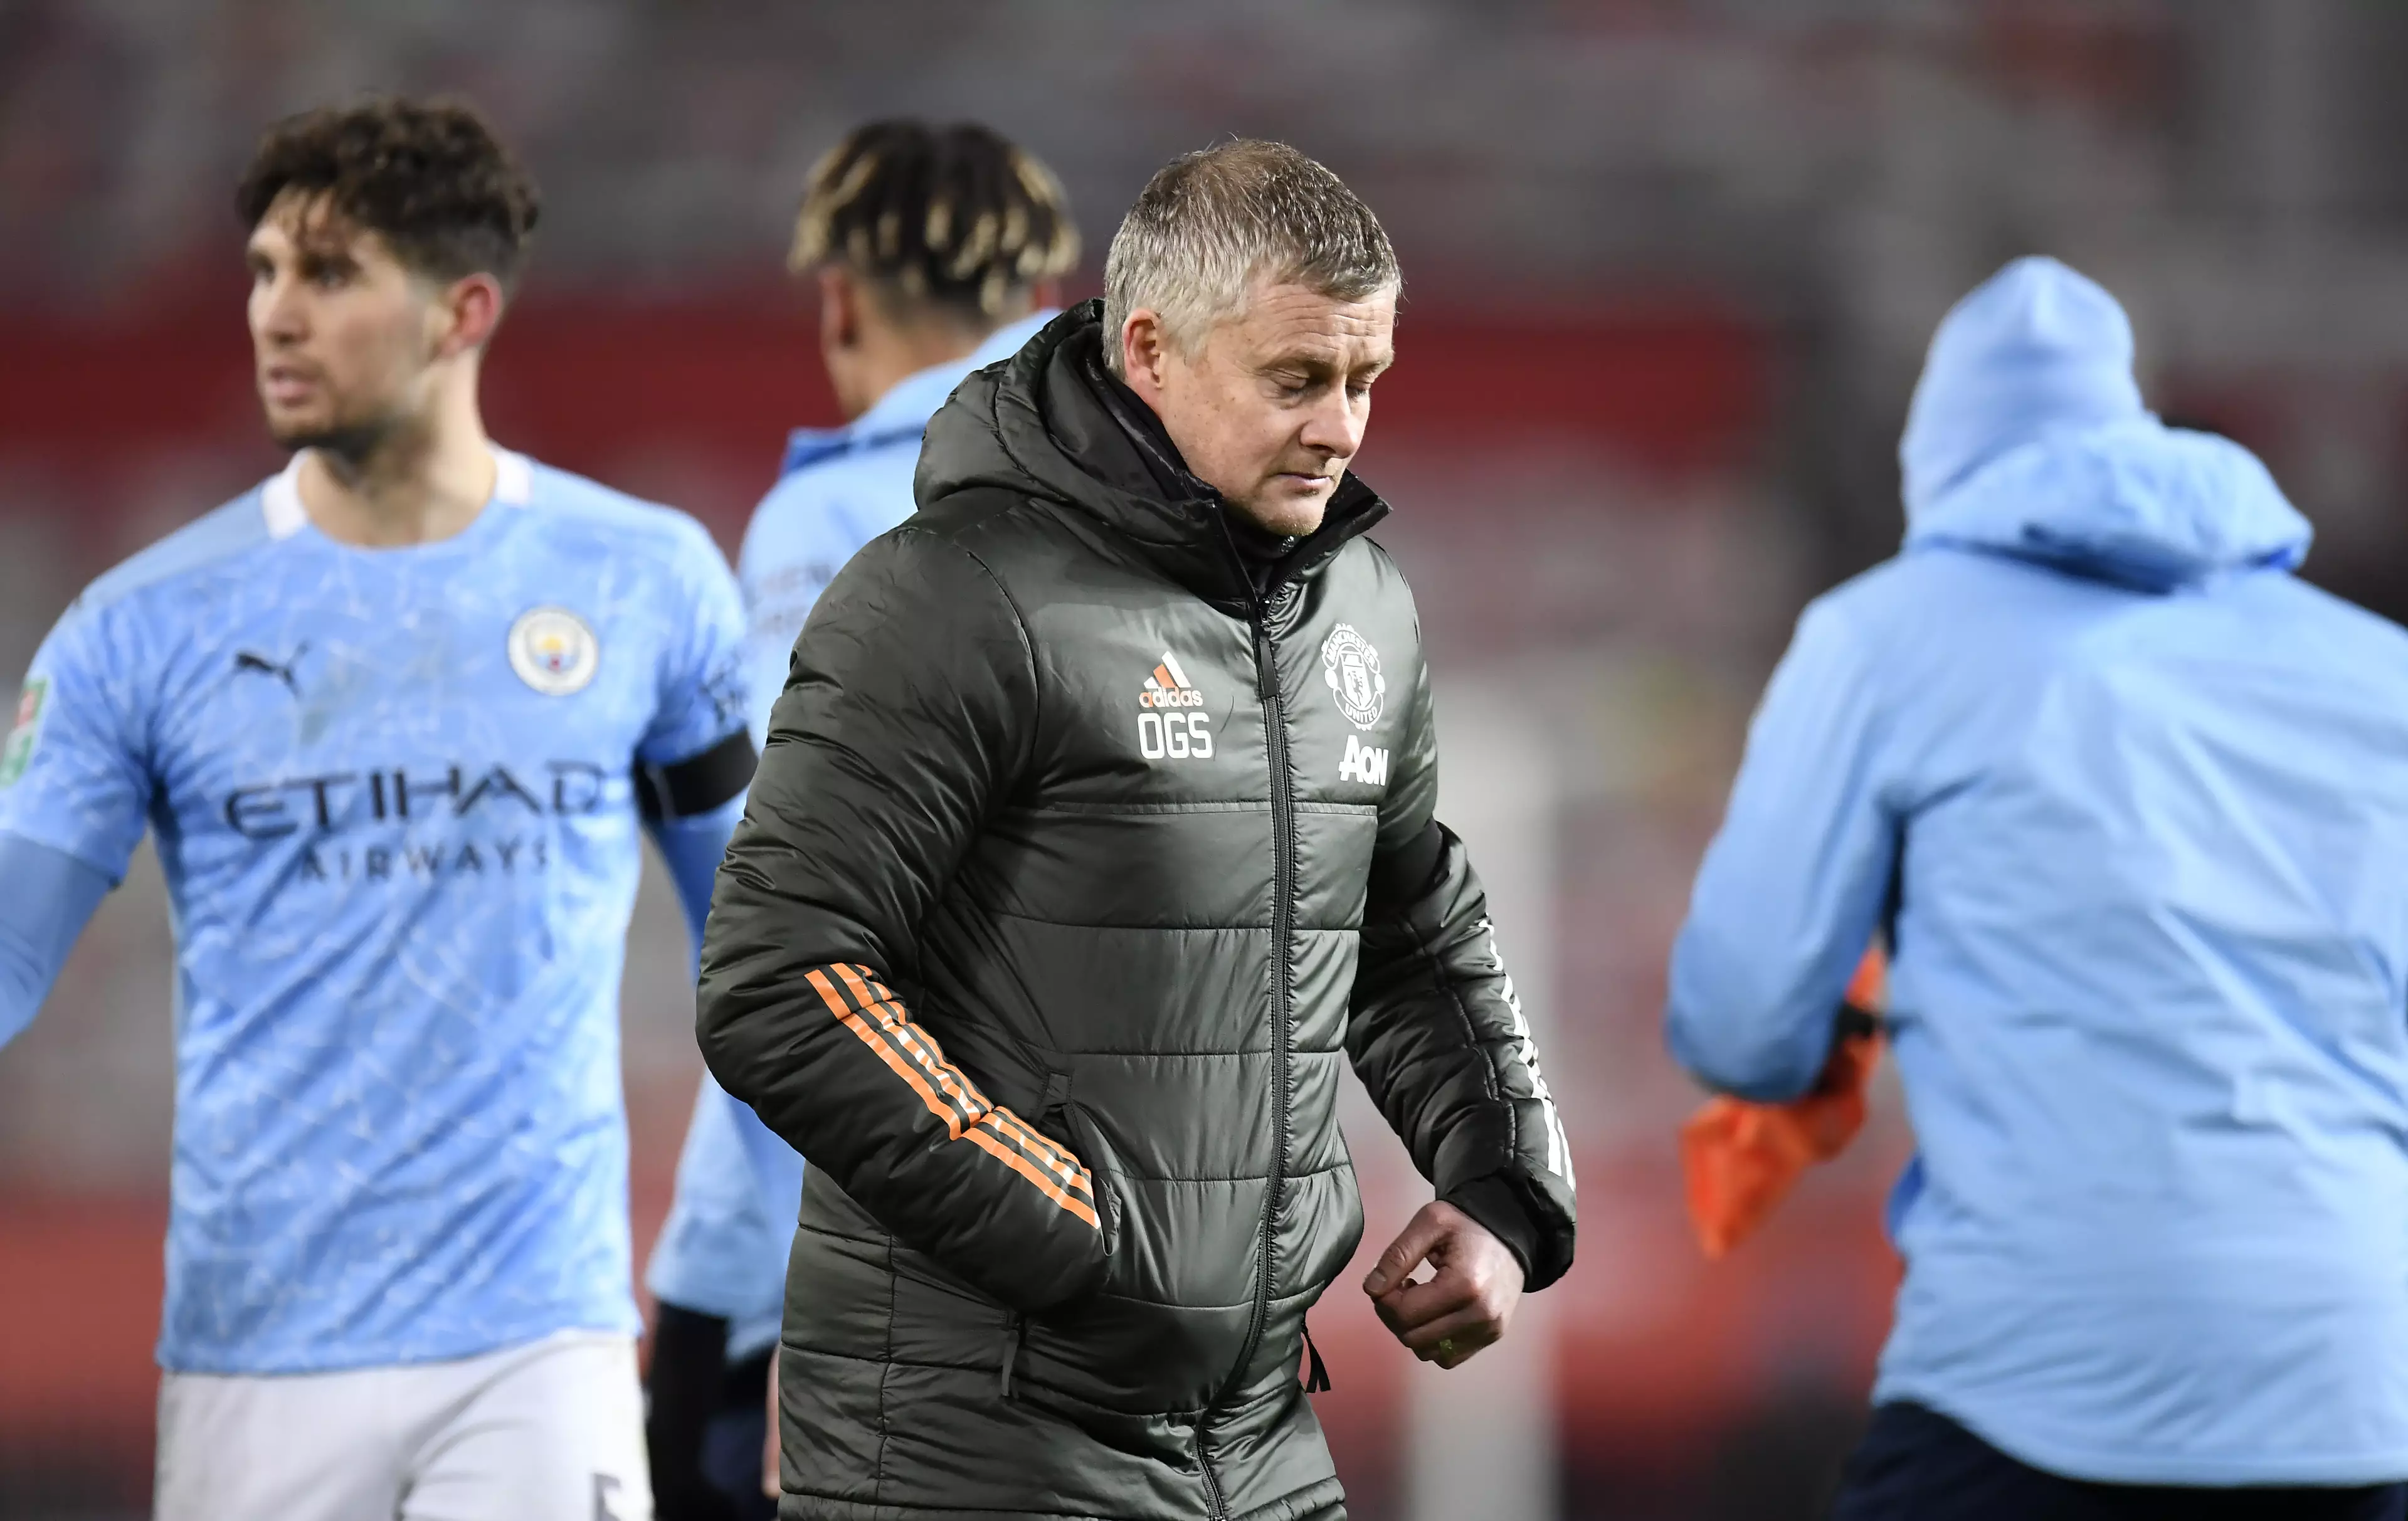 United's loss to City in the Carabao Cup semi final was his second defeat at the same stage to the same opponents in just over a year. Image: PA Images